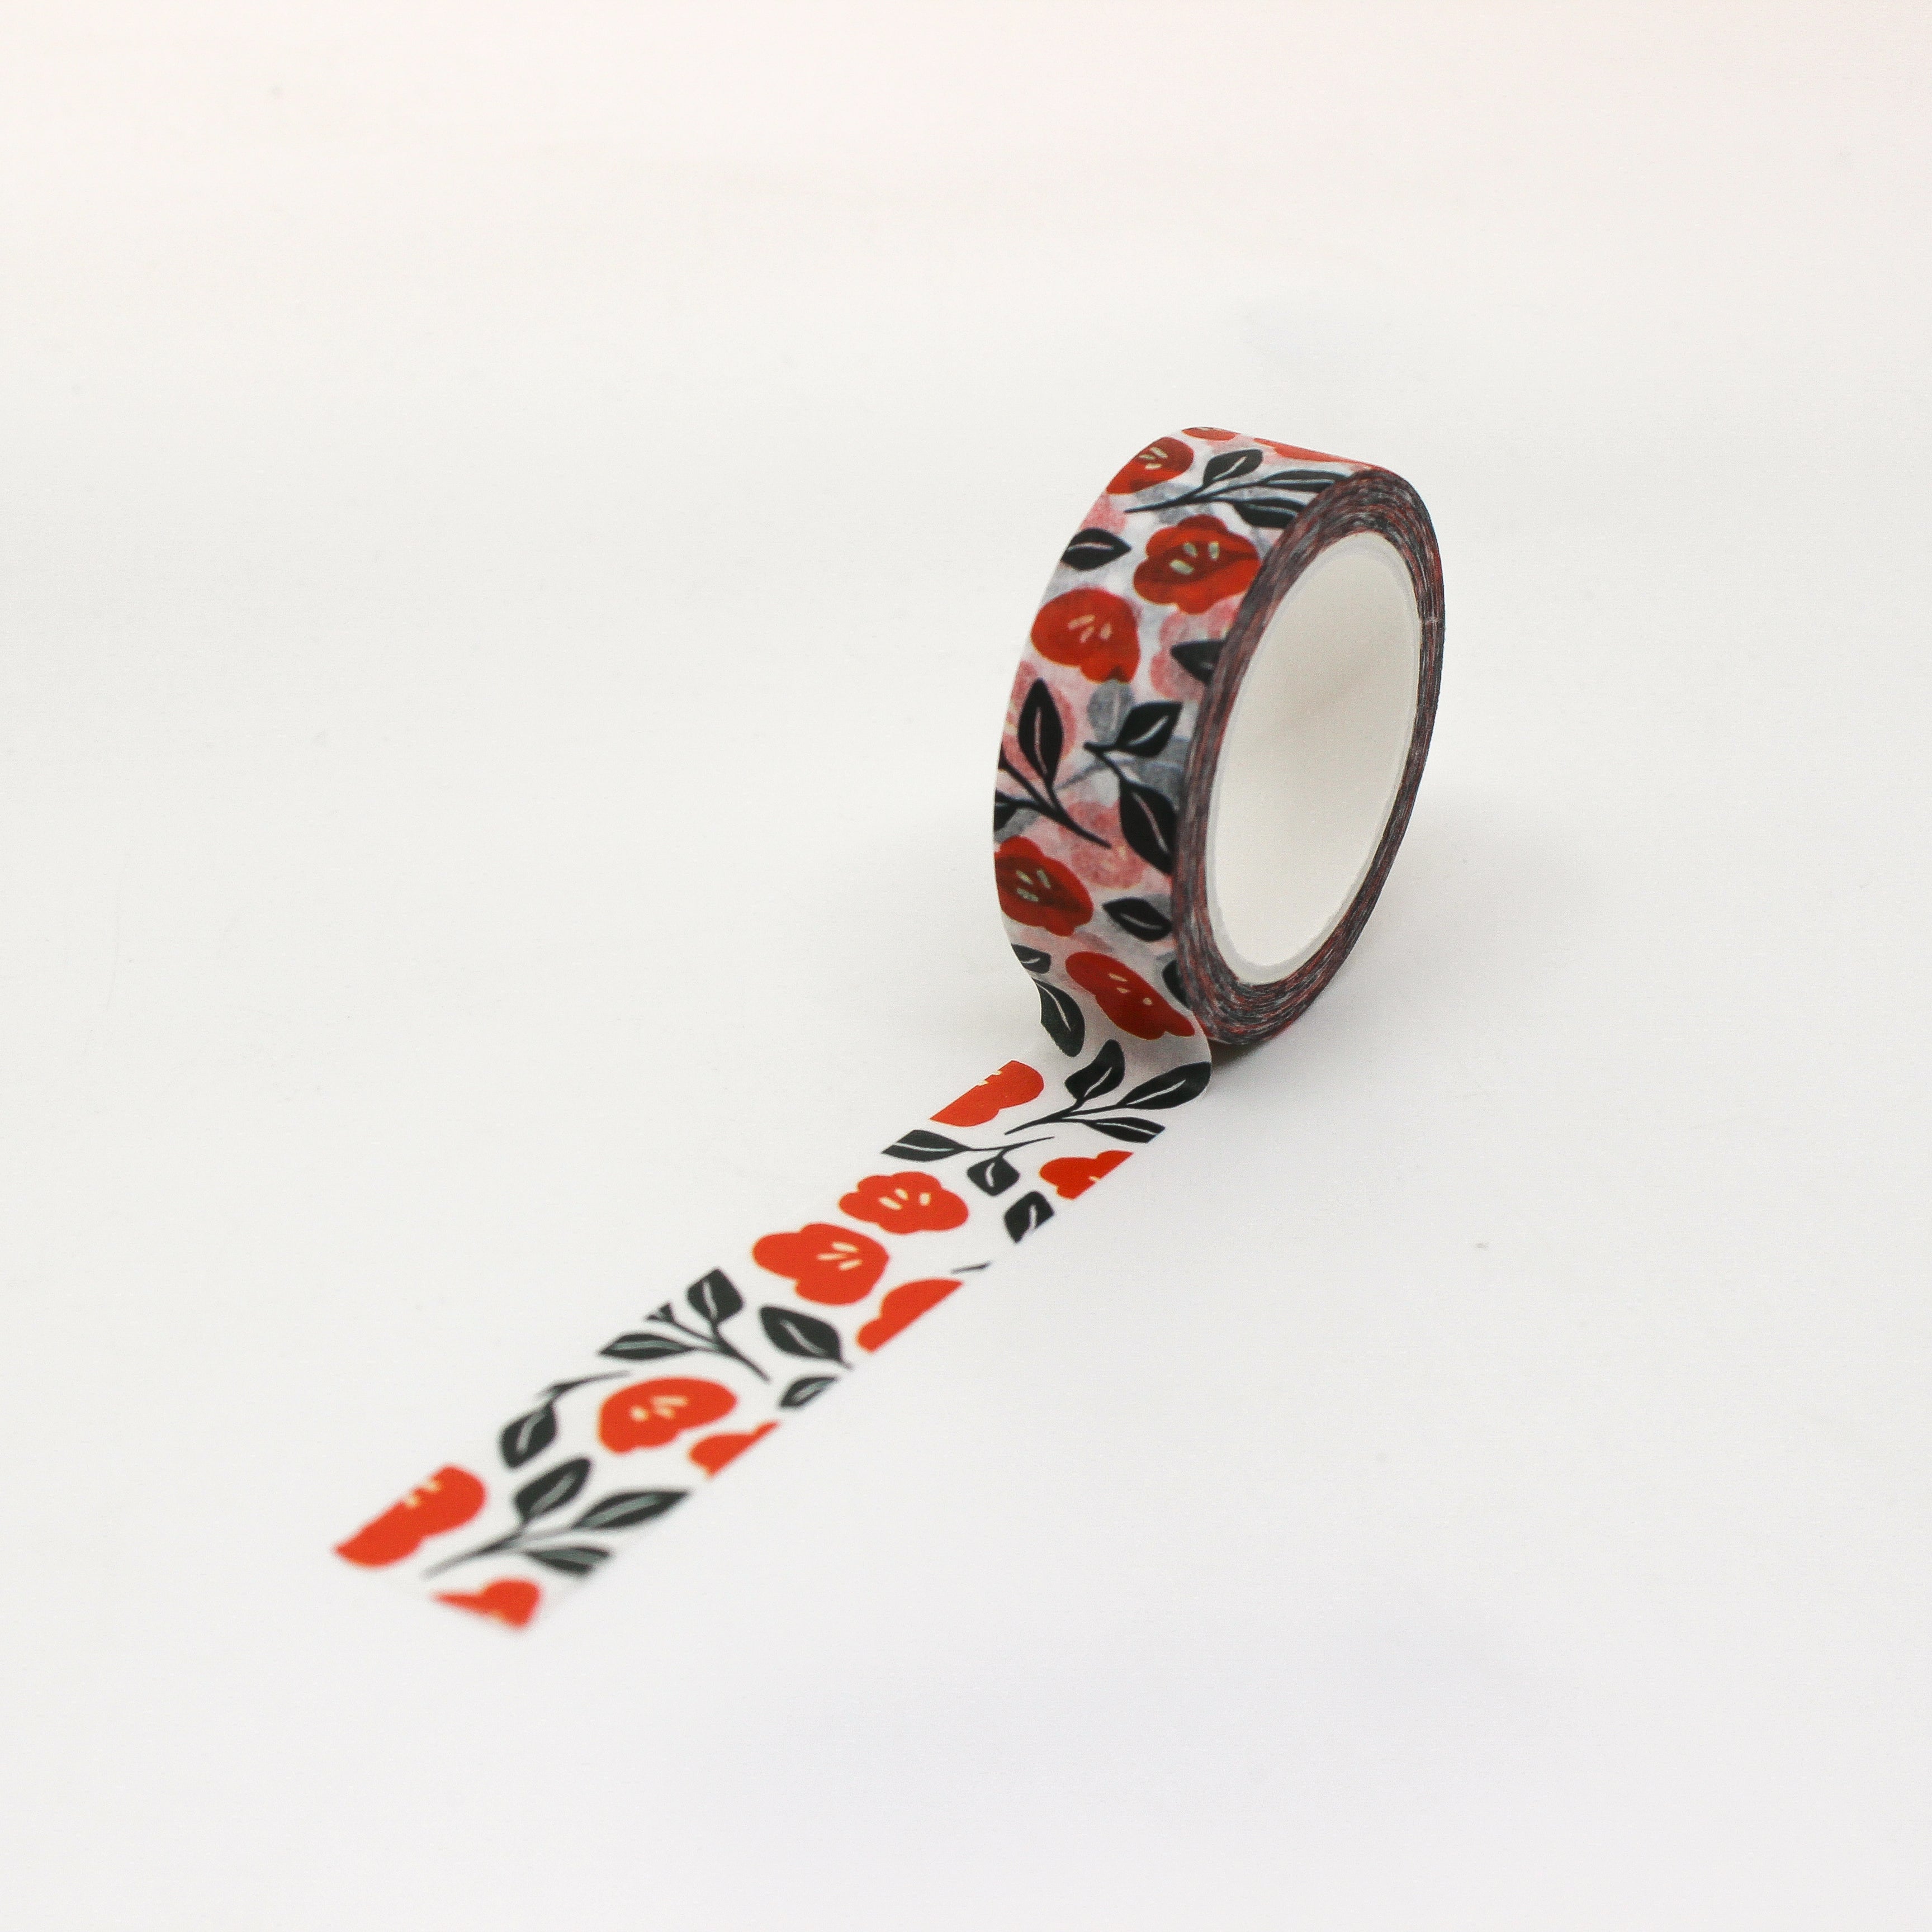 Full Pattern Repeat of Elegant Red Floral tape from Zynshe that is perfect for gift wrap, craft projects or journaling sold at BBB Supplies Craft Shop.